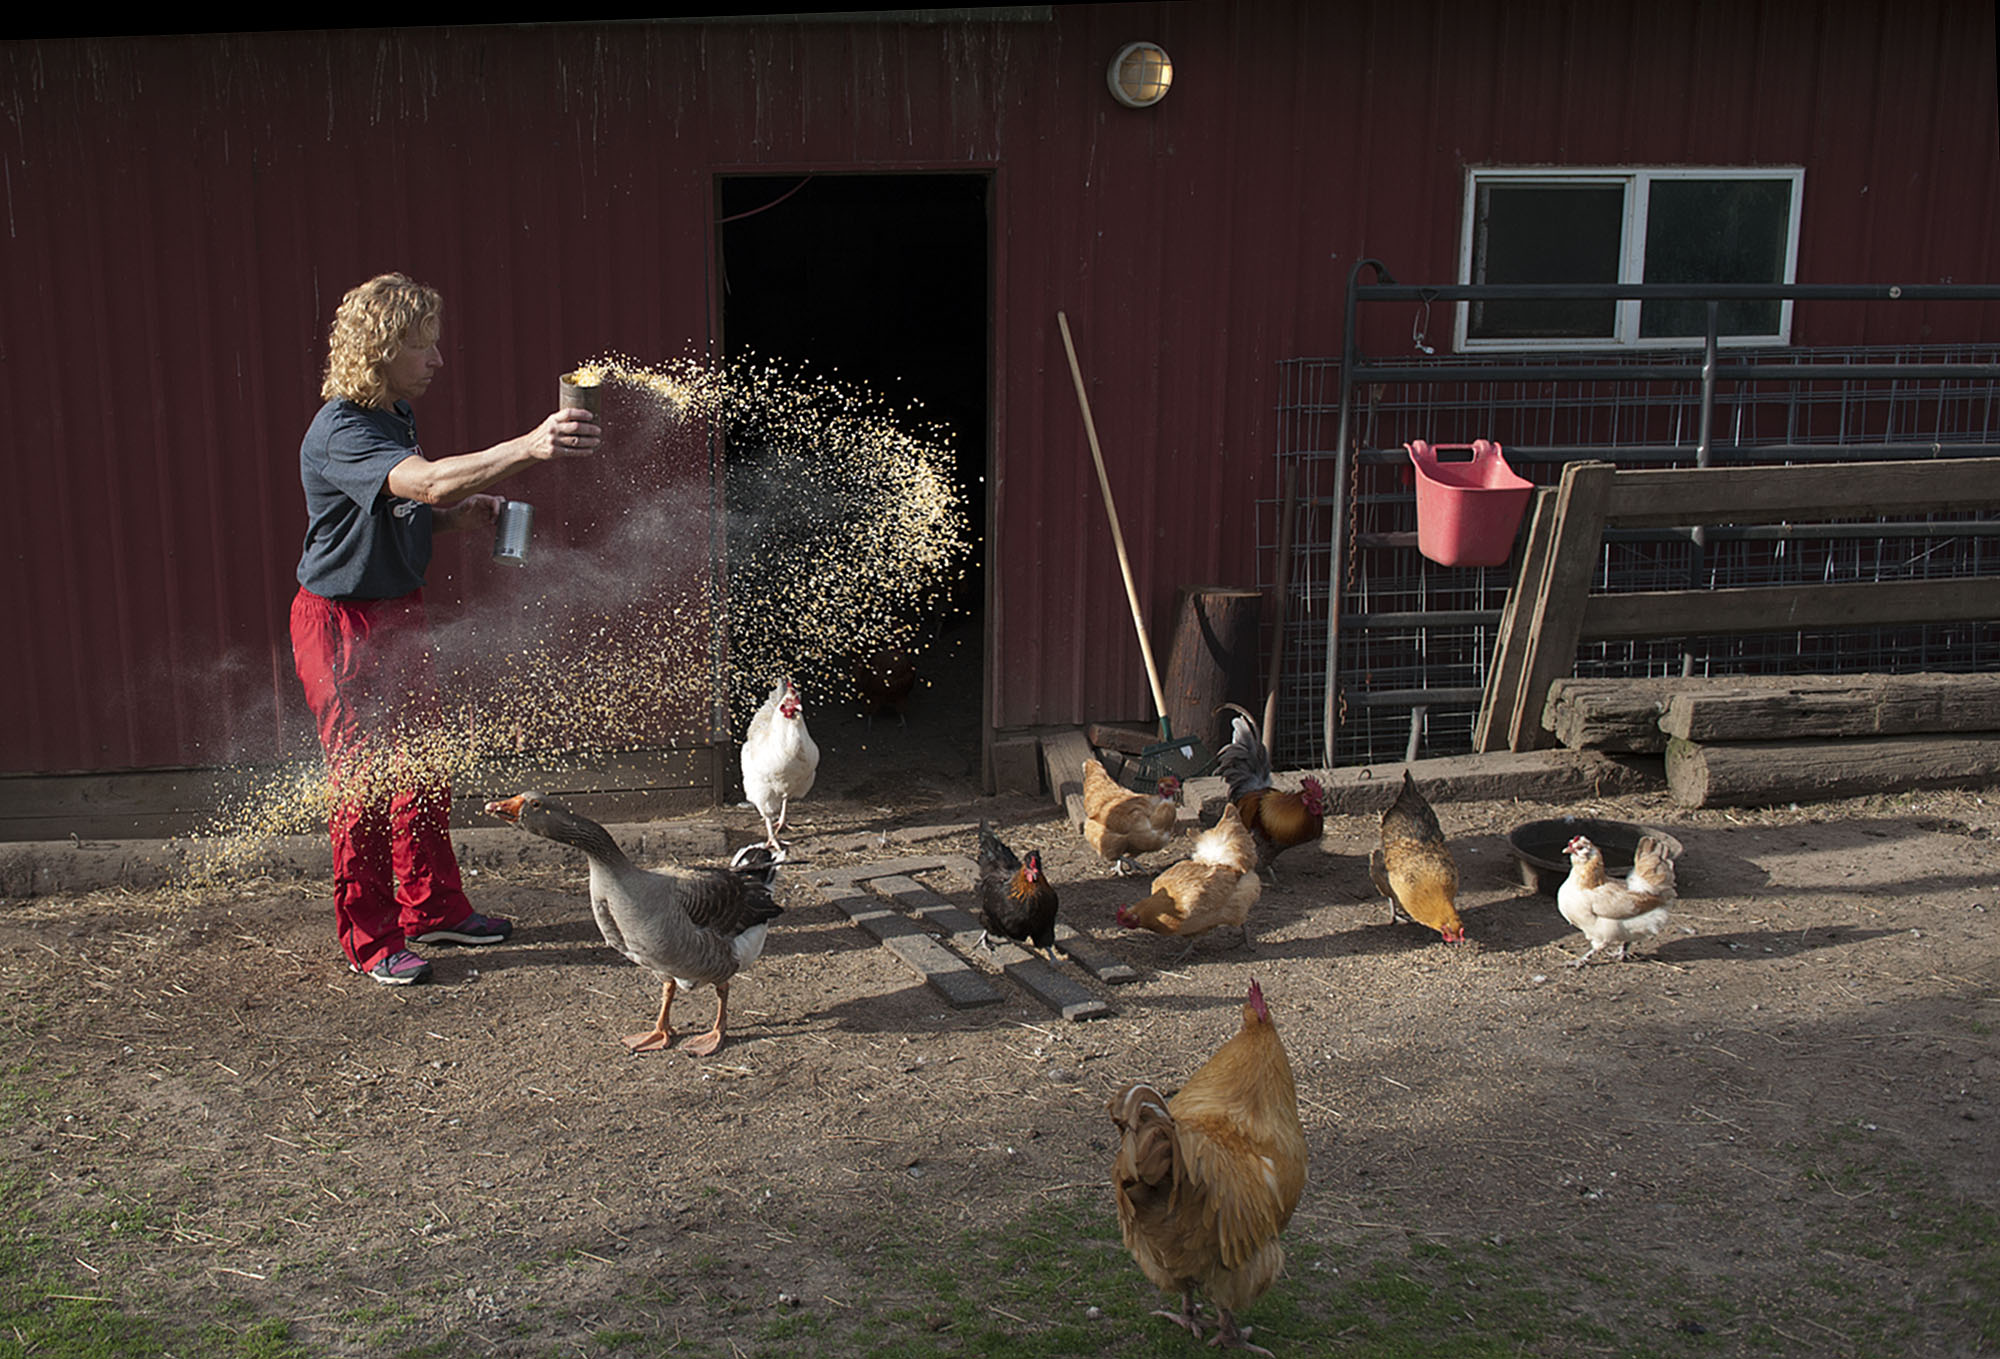 Julia Griffith feeds some of her feathered friends before the family sits down to dinner Thursday evening, April 21, 2016 in Ridgefield. (Amanda Cowan/The Columbian)